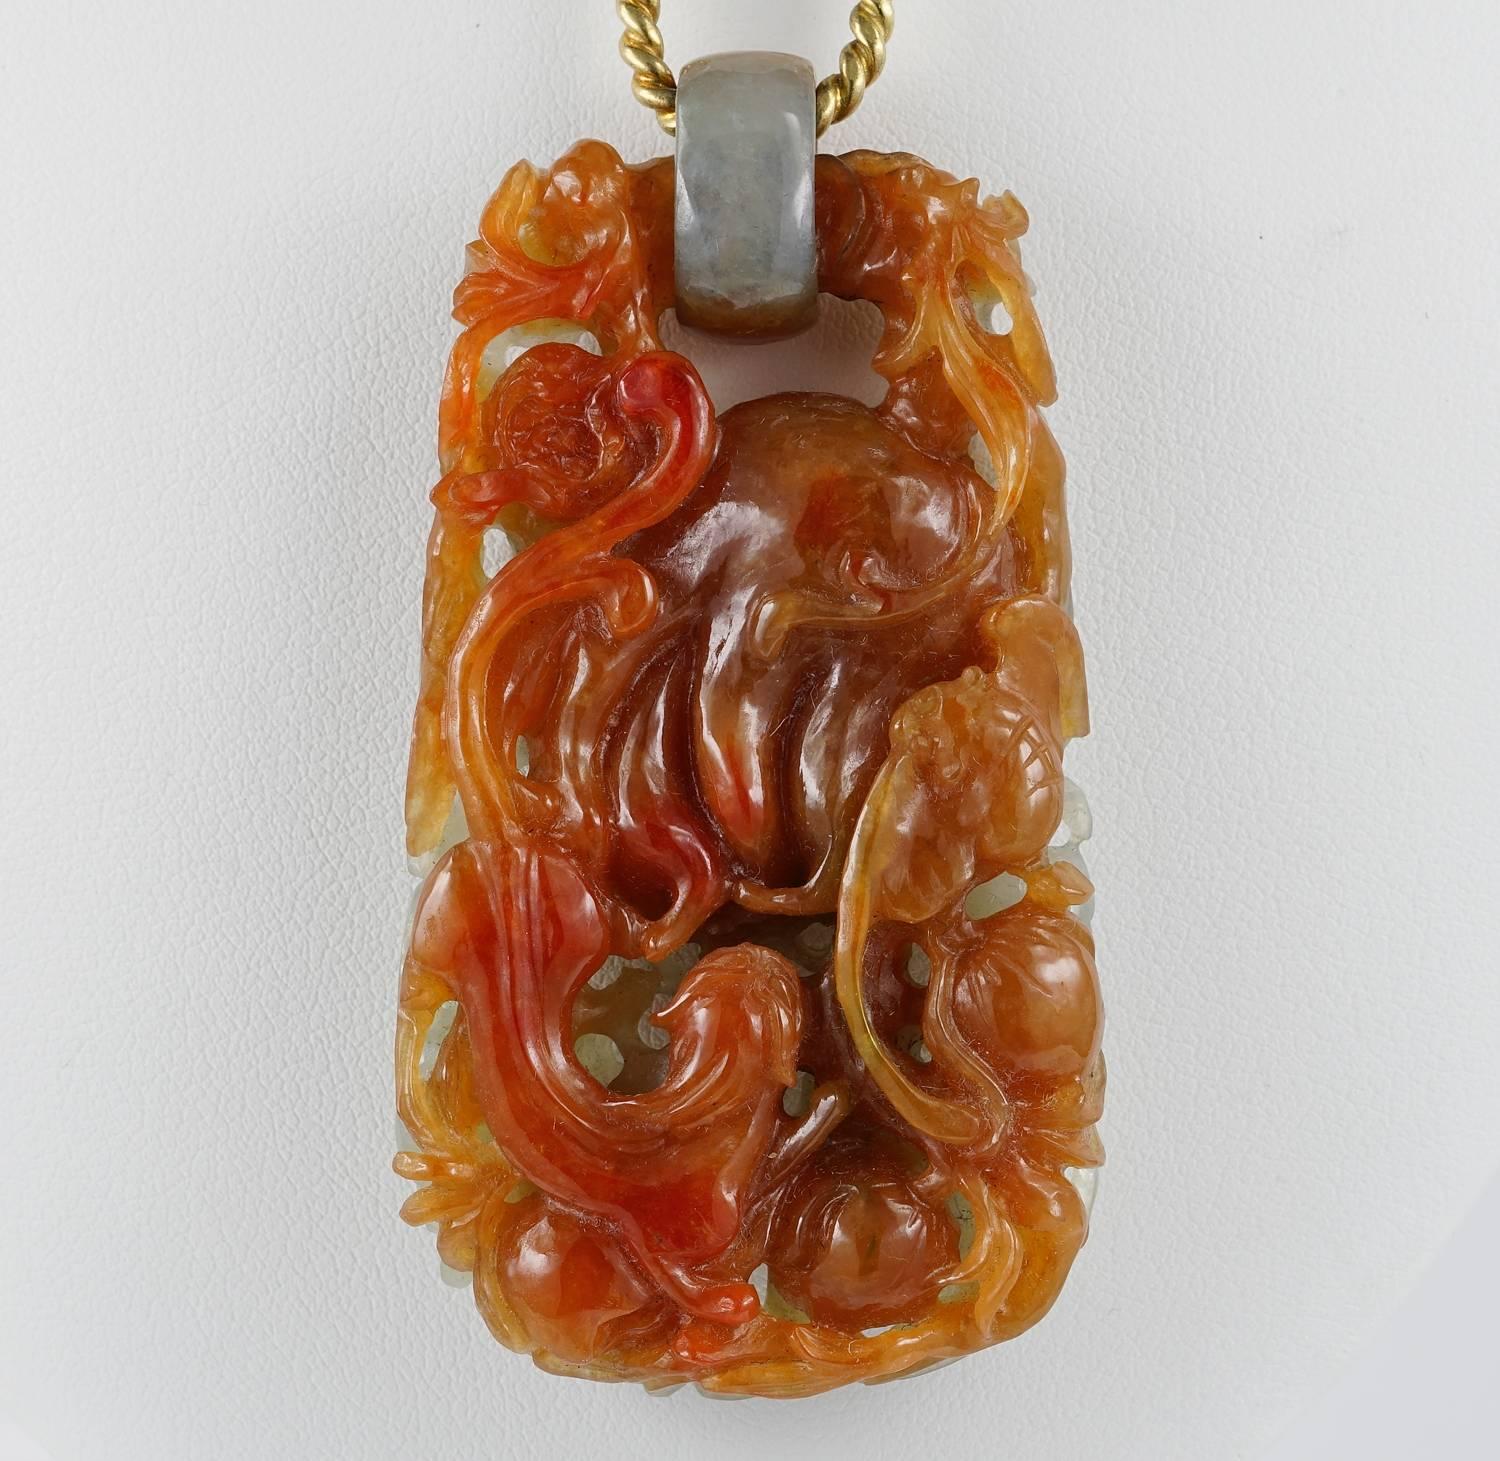 A beautiful antique Chinese origin natural Jade necklace monuted in solid 18 KT gold
The necklace comprises an eleaborate deep carving pendant of Natural not treated Celadon and Russet Jade featuring lots of symbolic subject dear in the Chinese